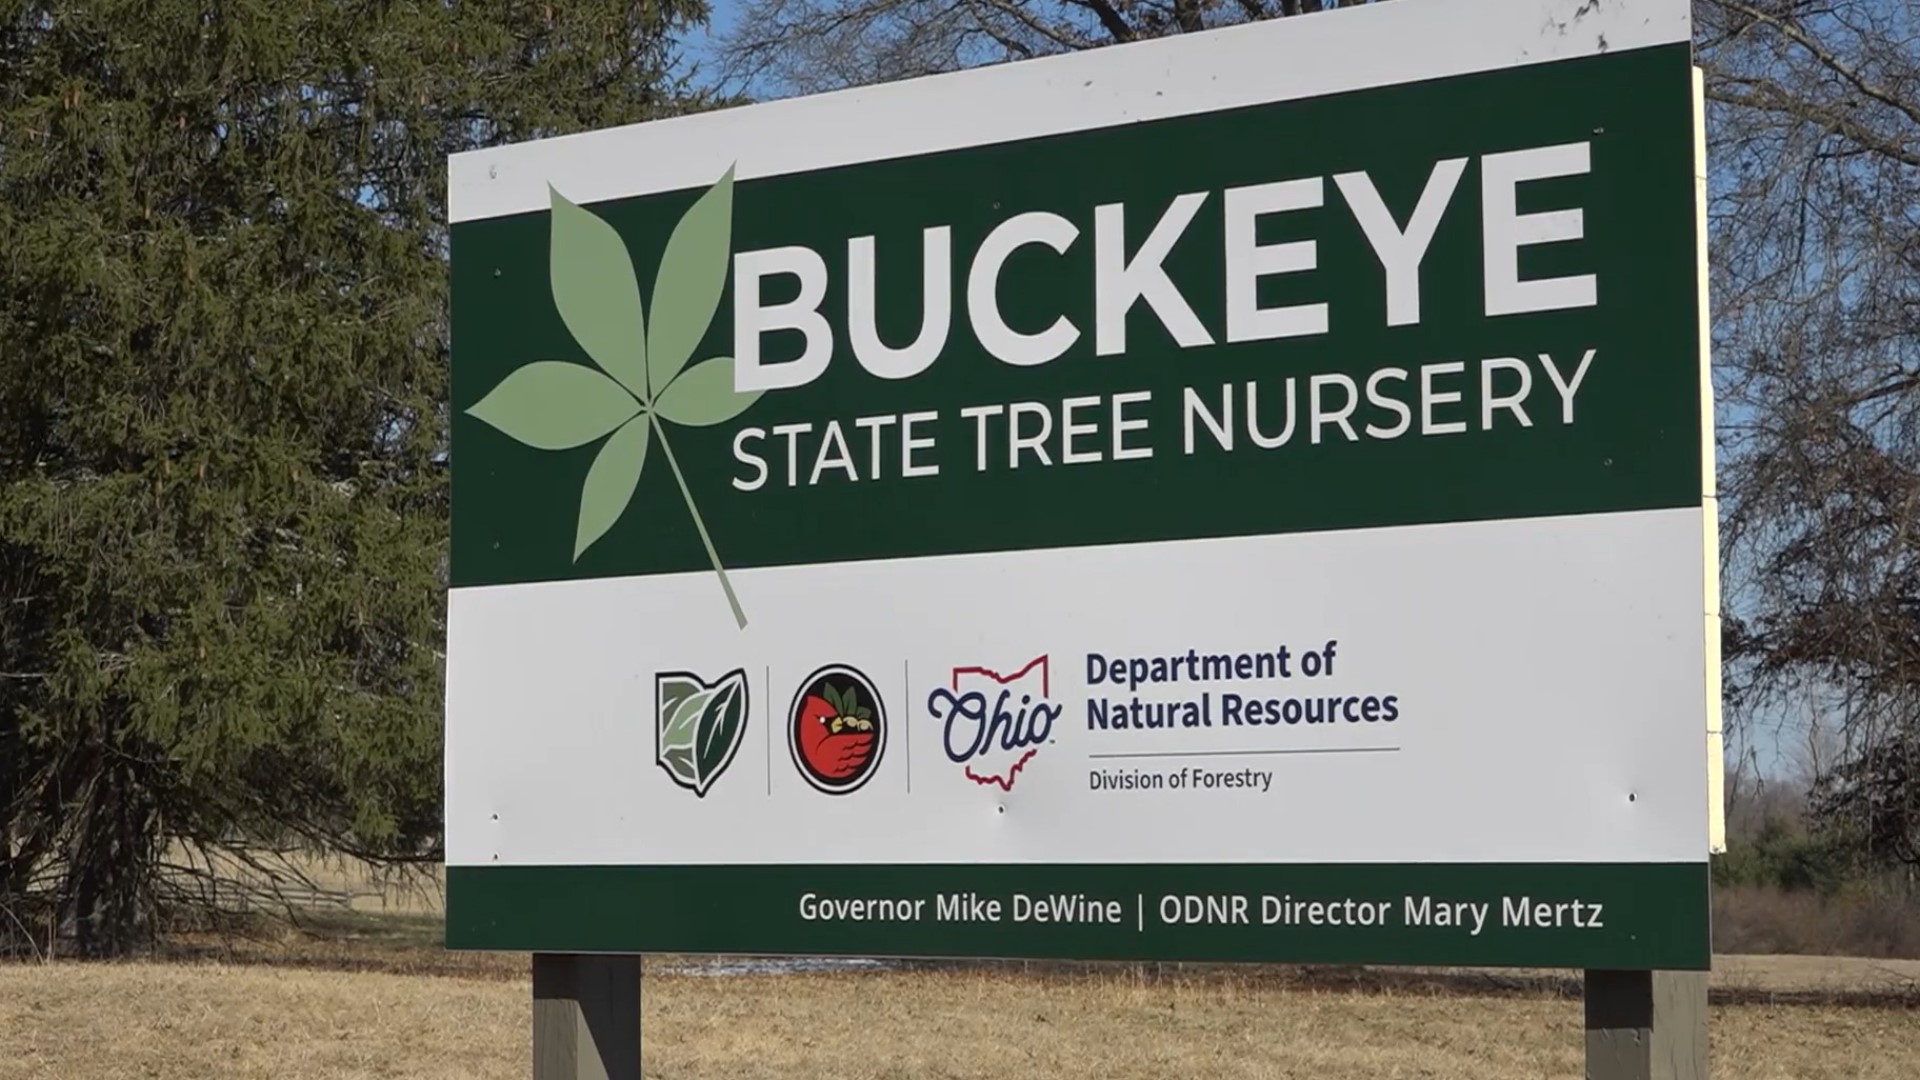 The first seeds were planted in the new Buckeye State Tree Nursery in Muskingum County on Monday.